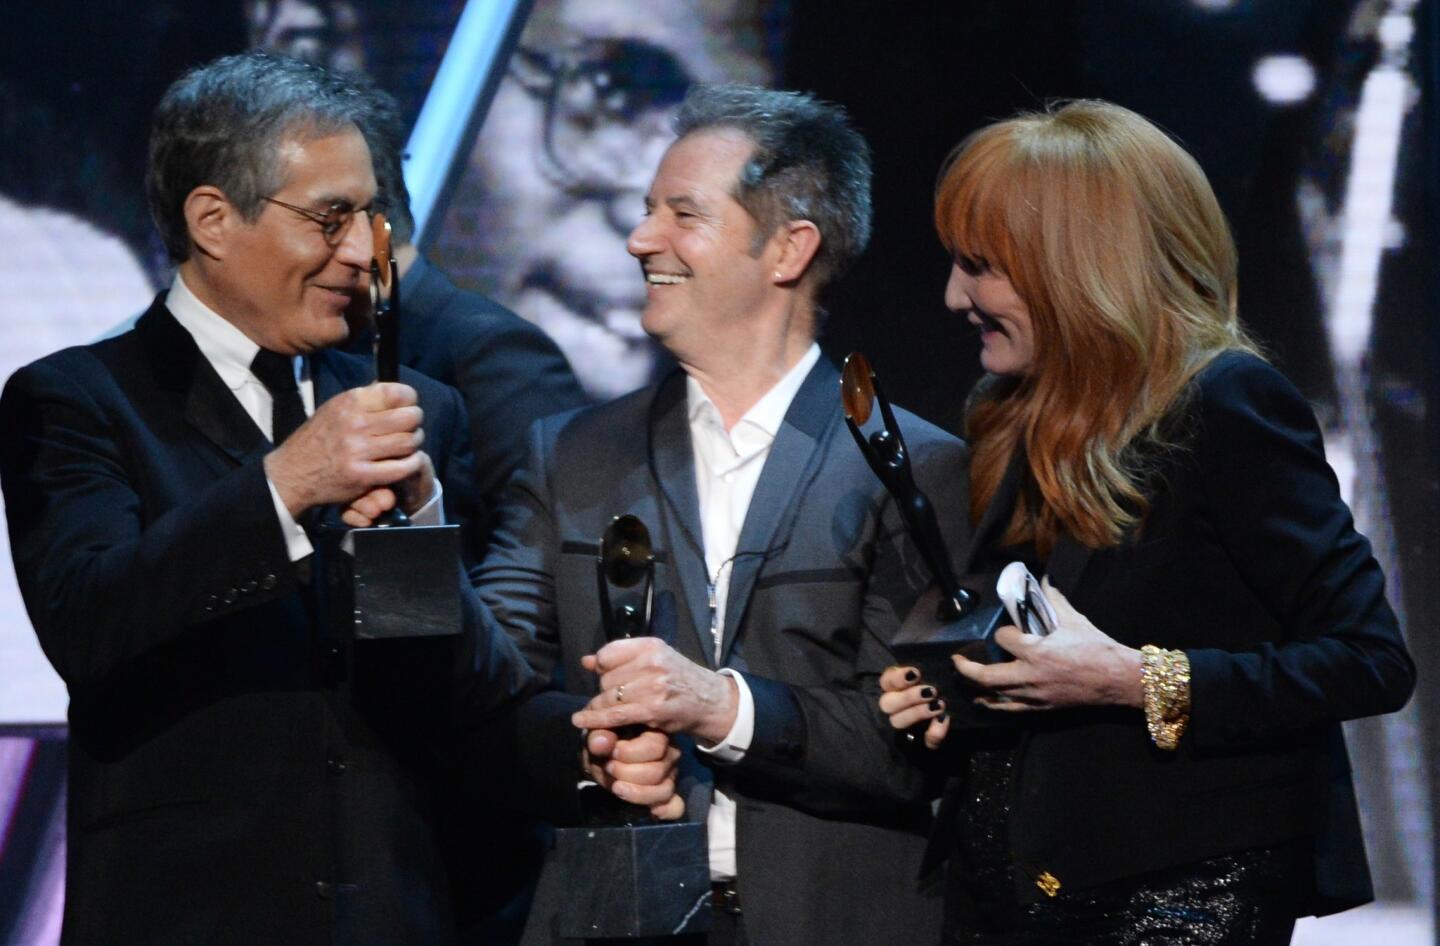 29th Rock and Roll Hall of Fame Induction Ceremony